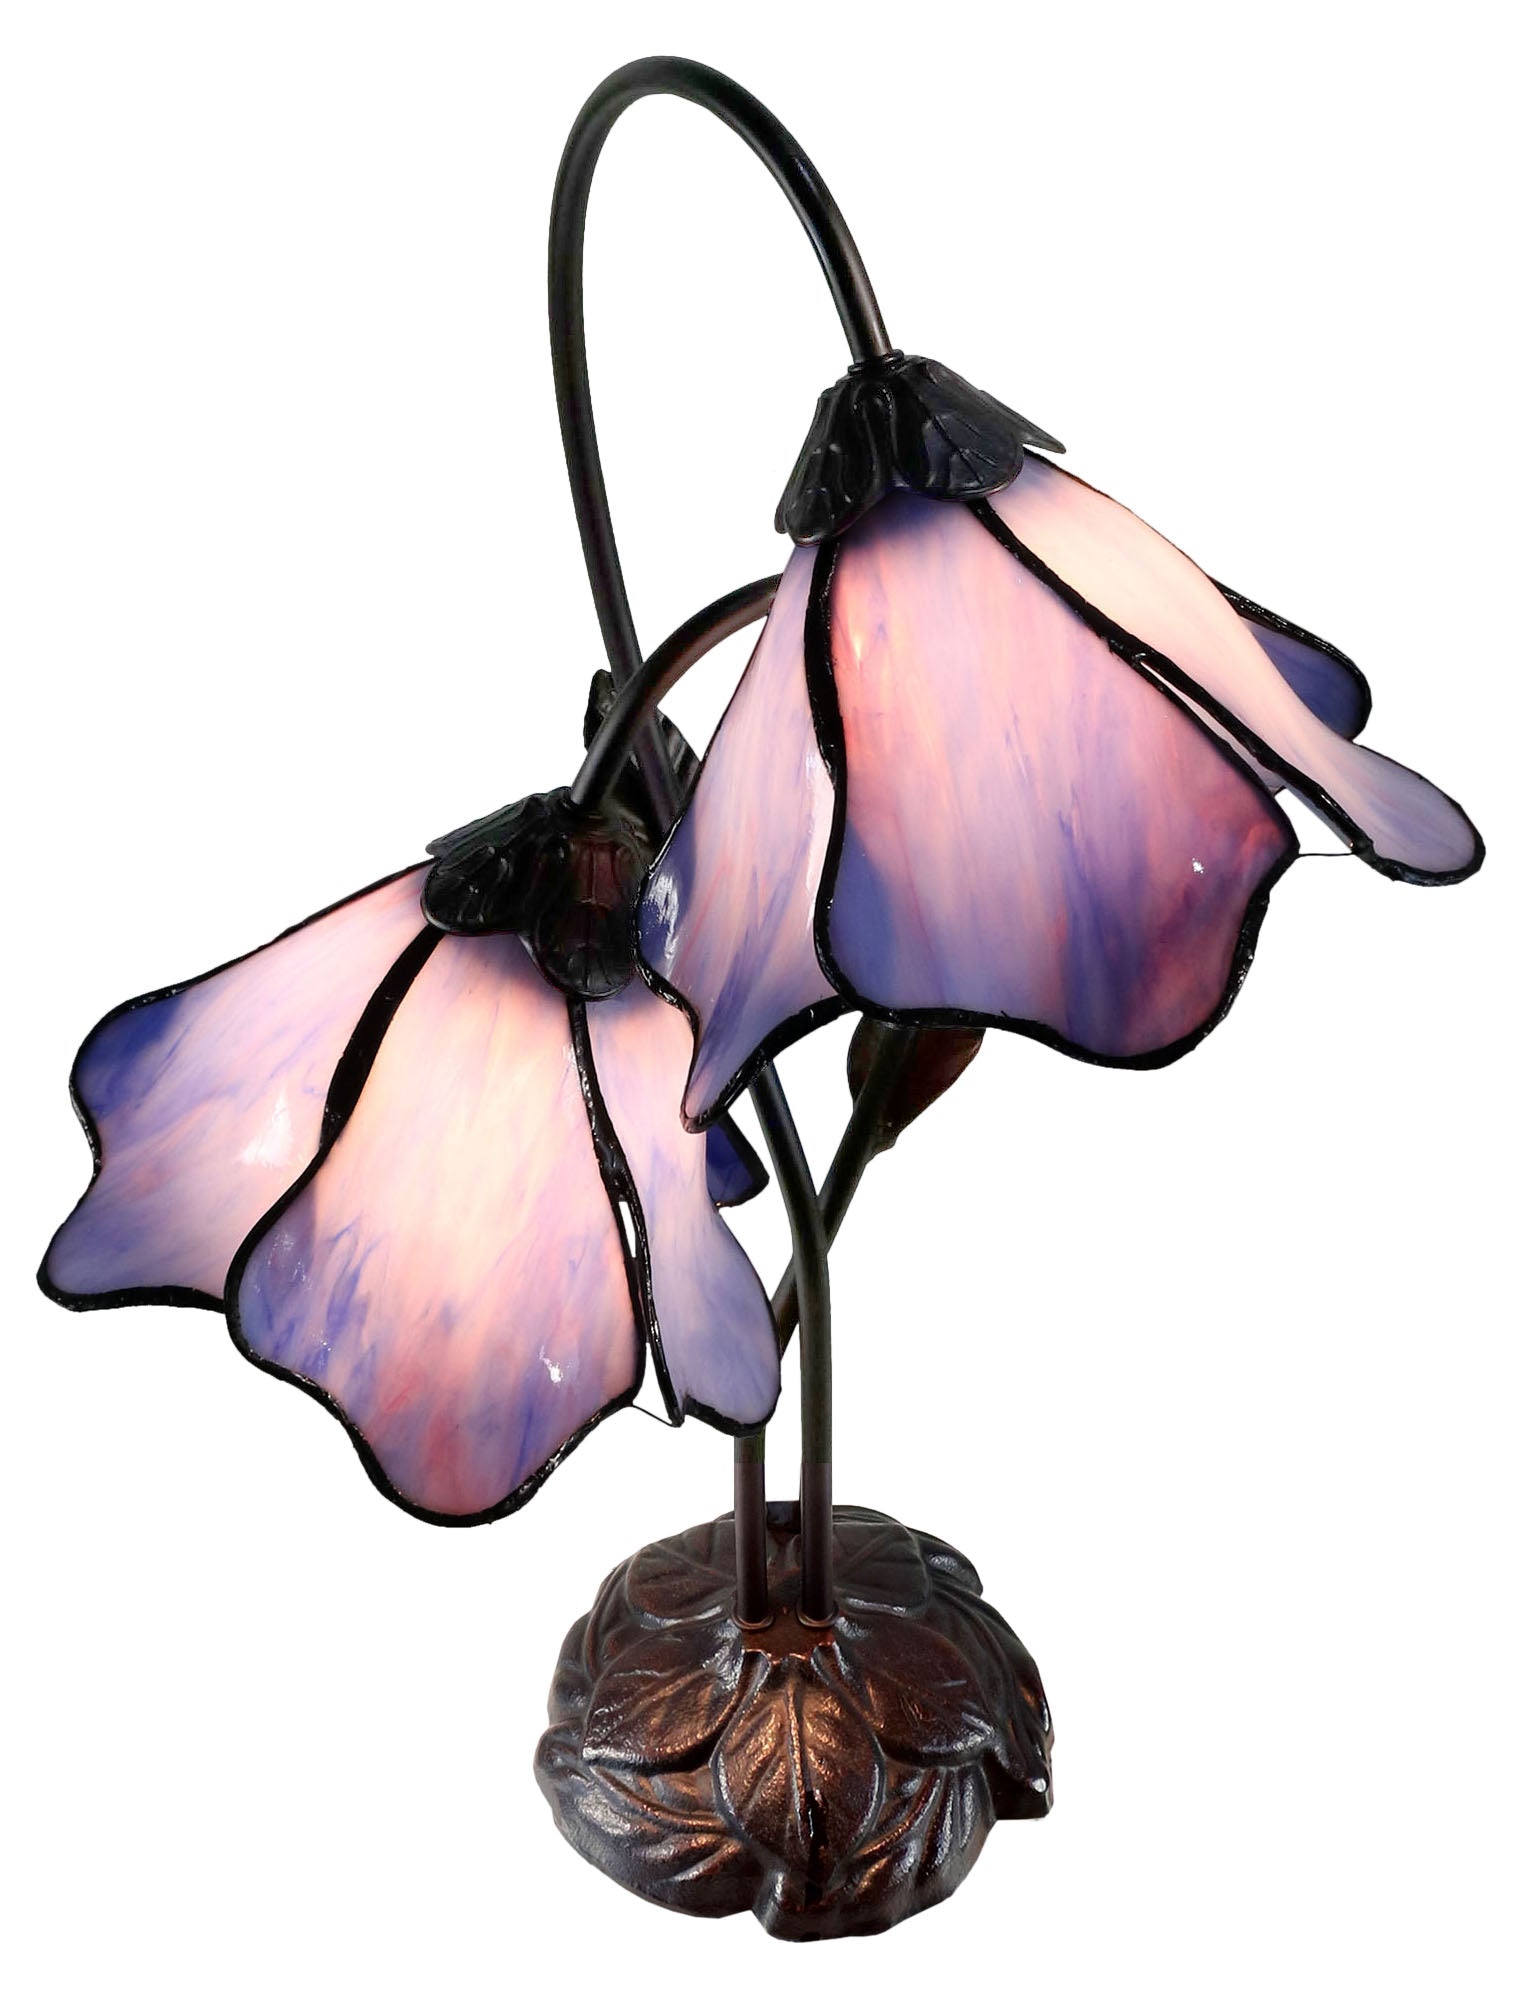 Double Lamp shade Flower  Water Lily Style Tiffany Table Lamp*Blue-Purple